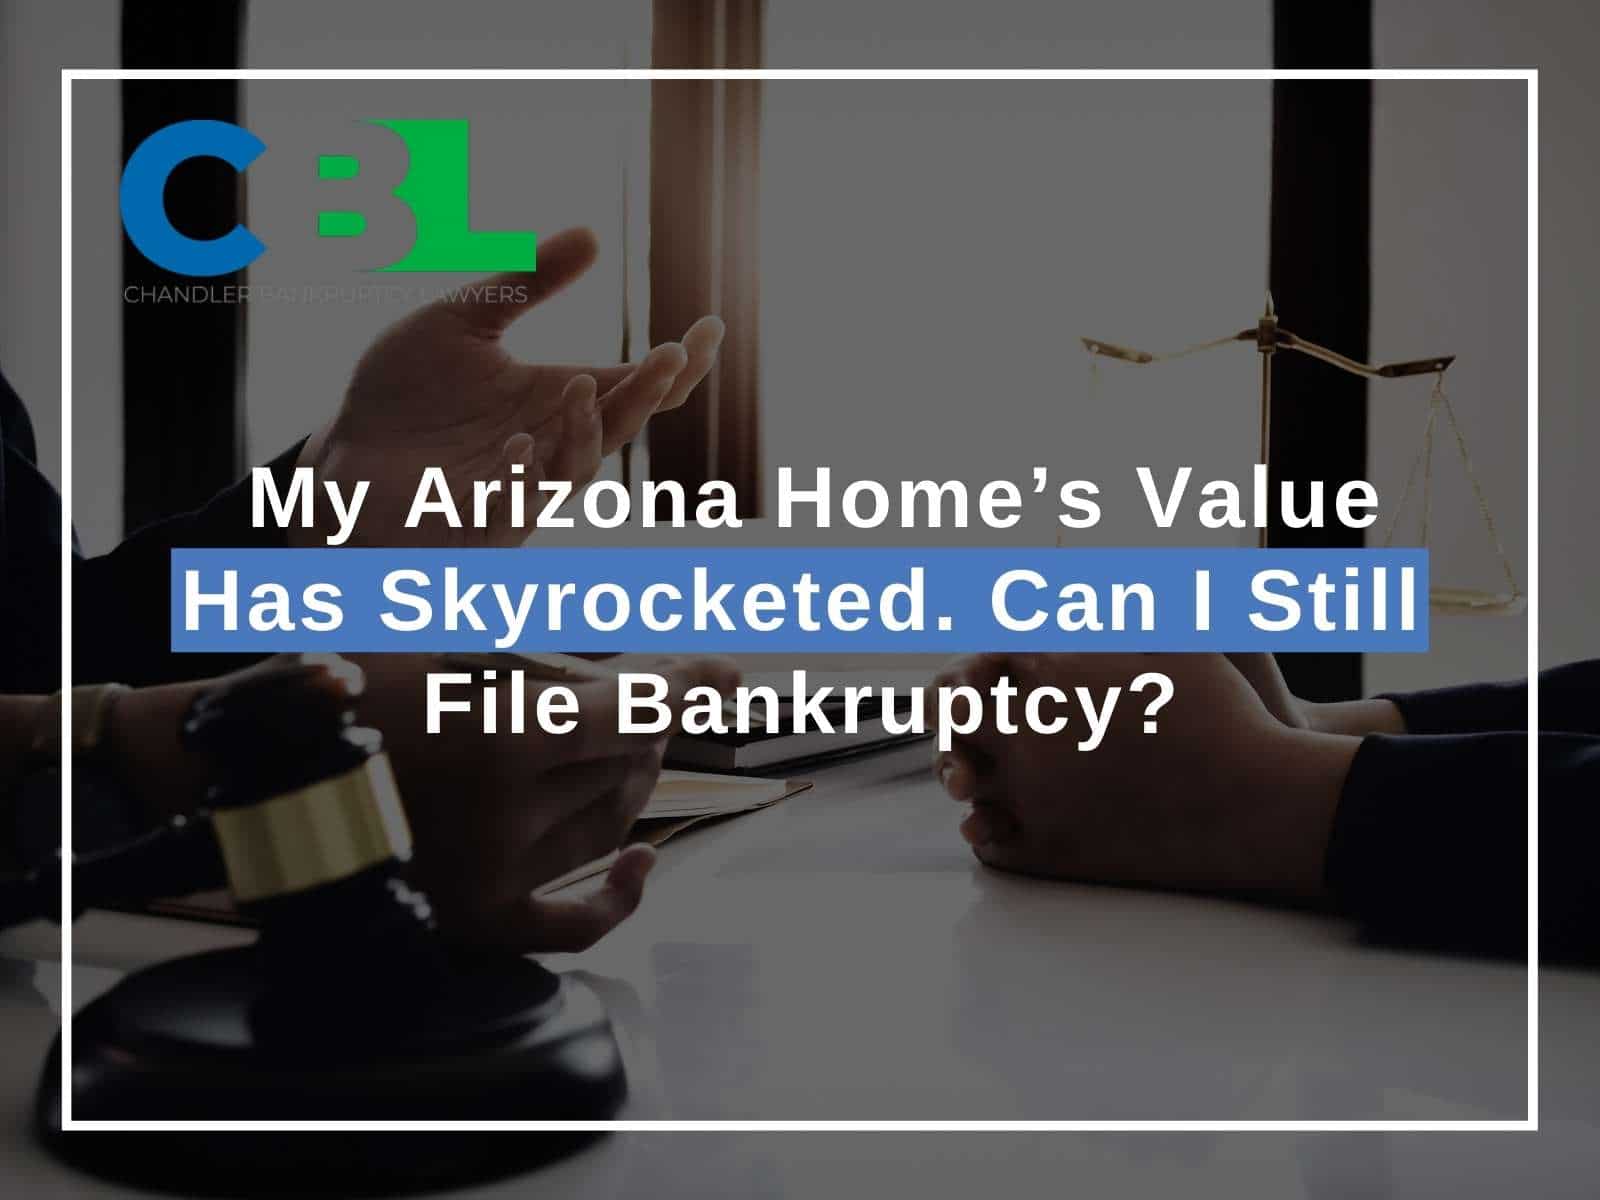 My Arizona Home’s Value Has Skyrocketed. Can I Still File Bankruptcy